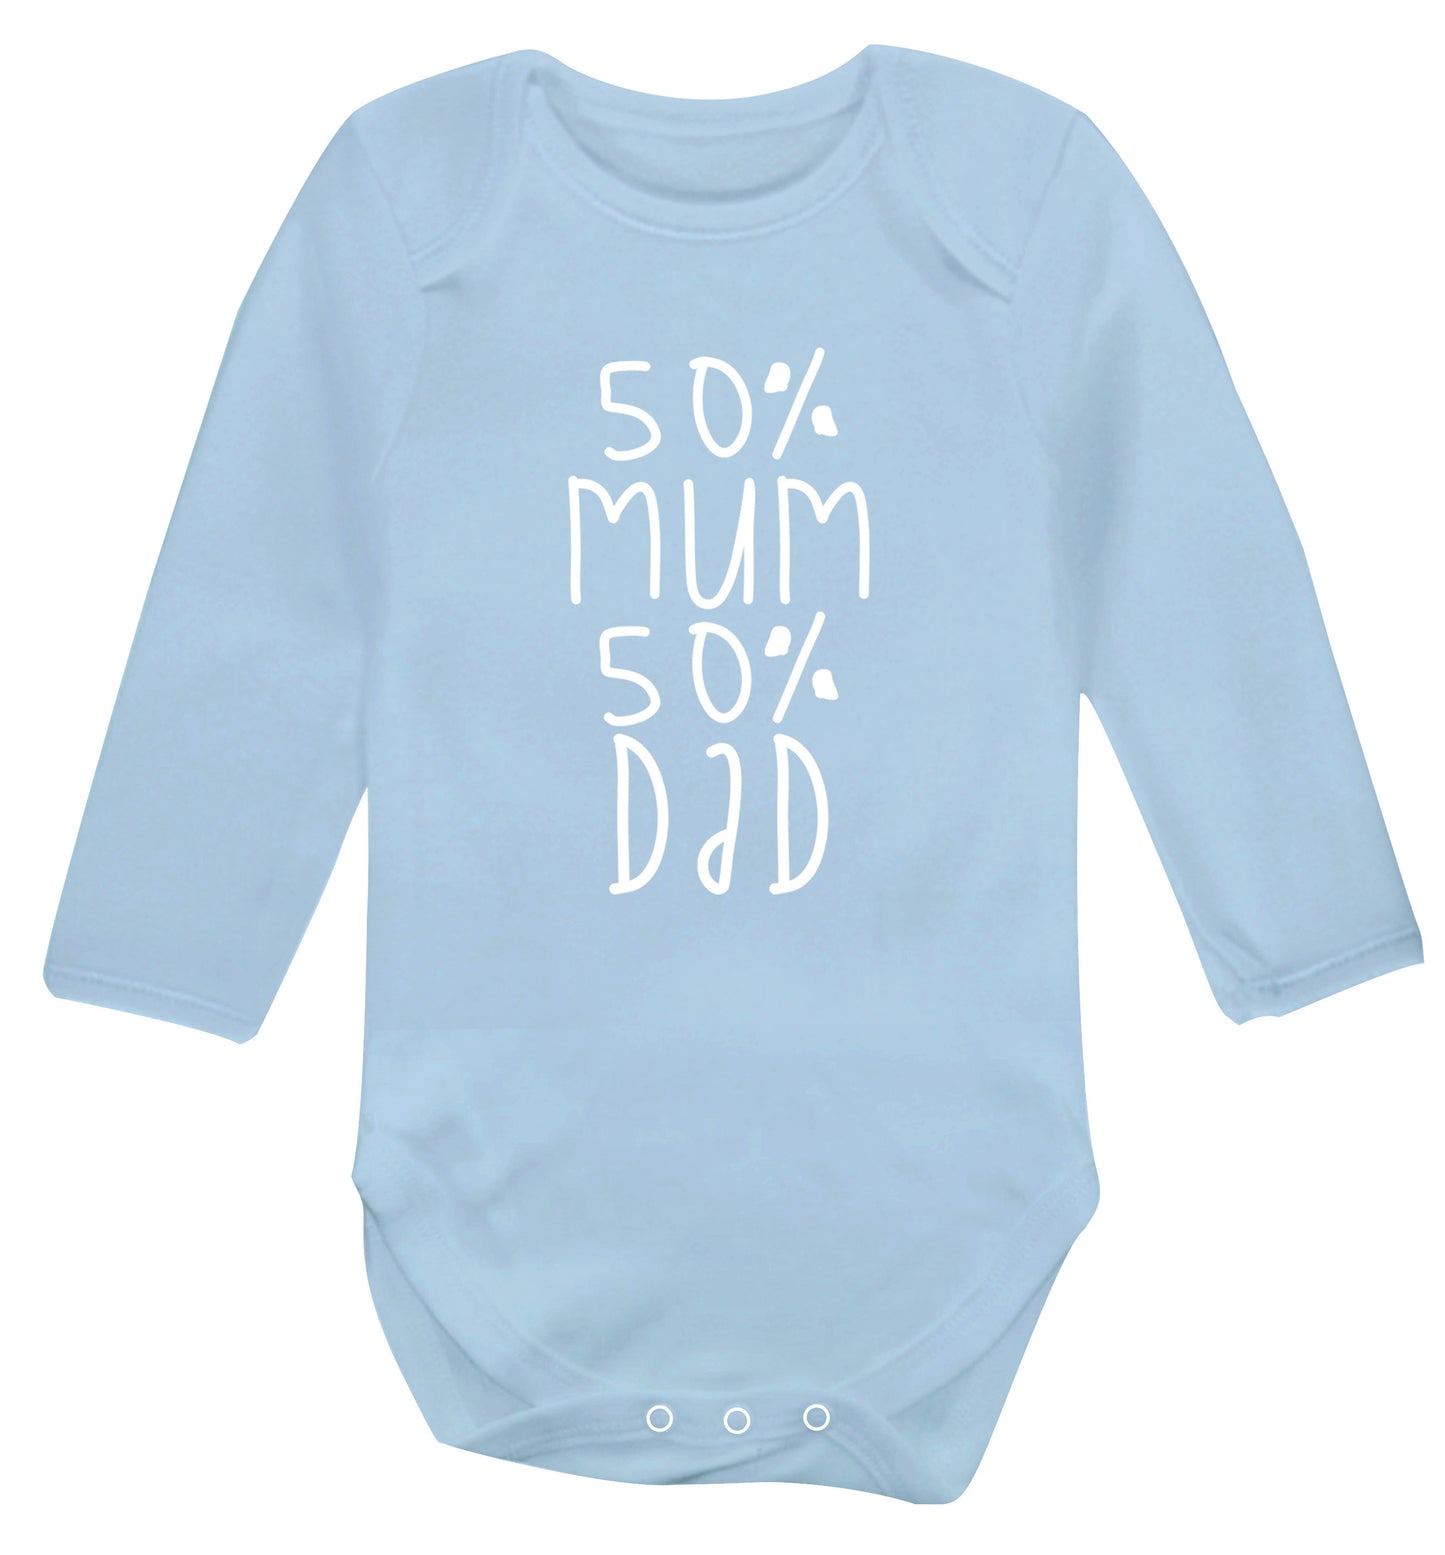 50% mum 50% dad Baby Vest long sleeved pale blue 6-12 months